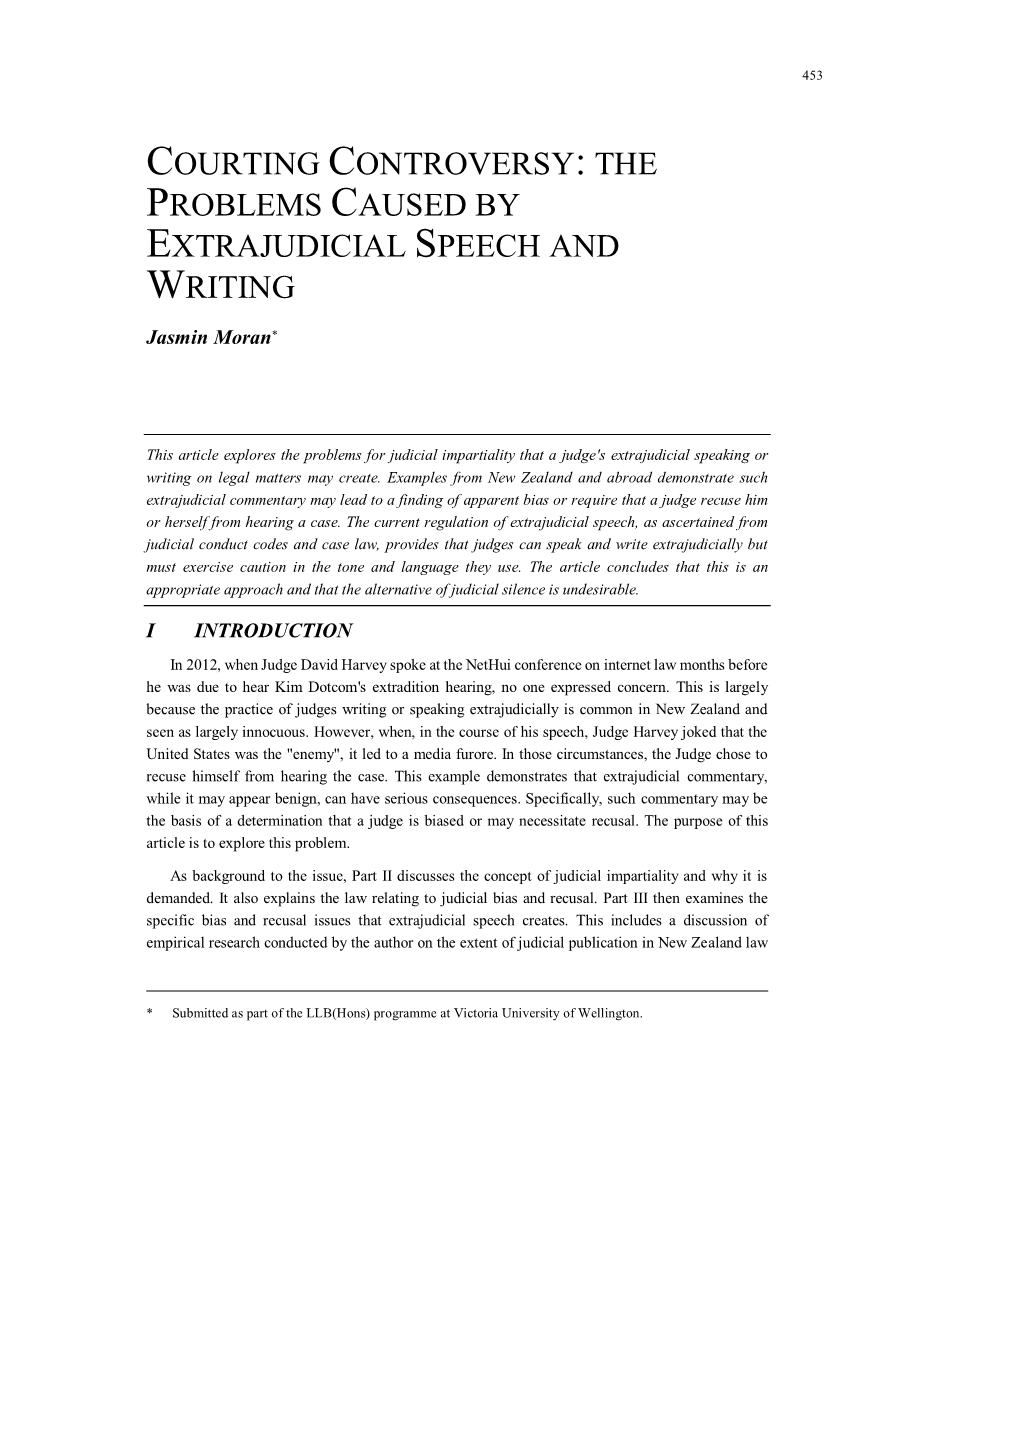 The Problems Caused by Extrajudicial Speech and Writing